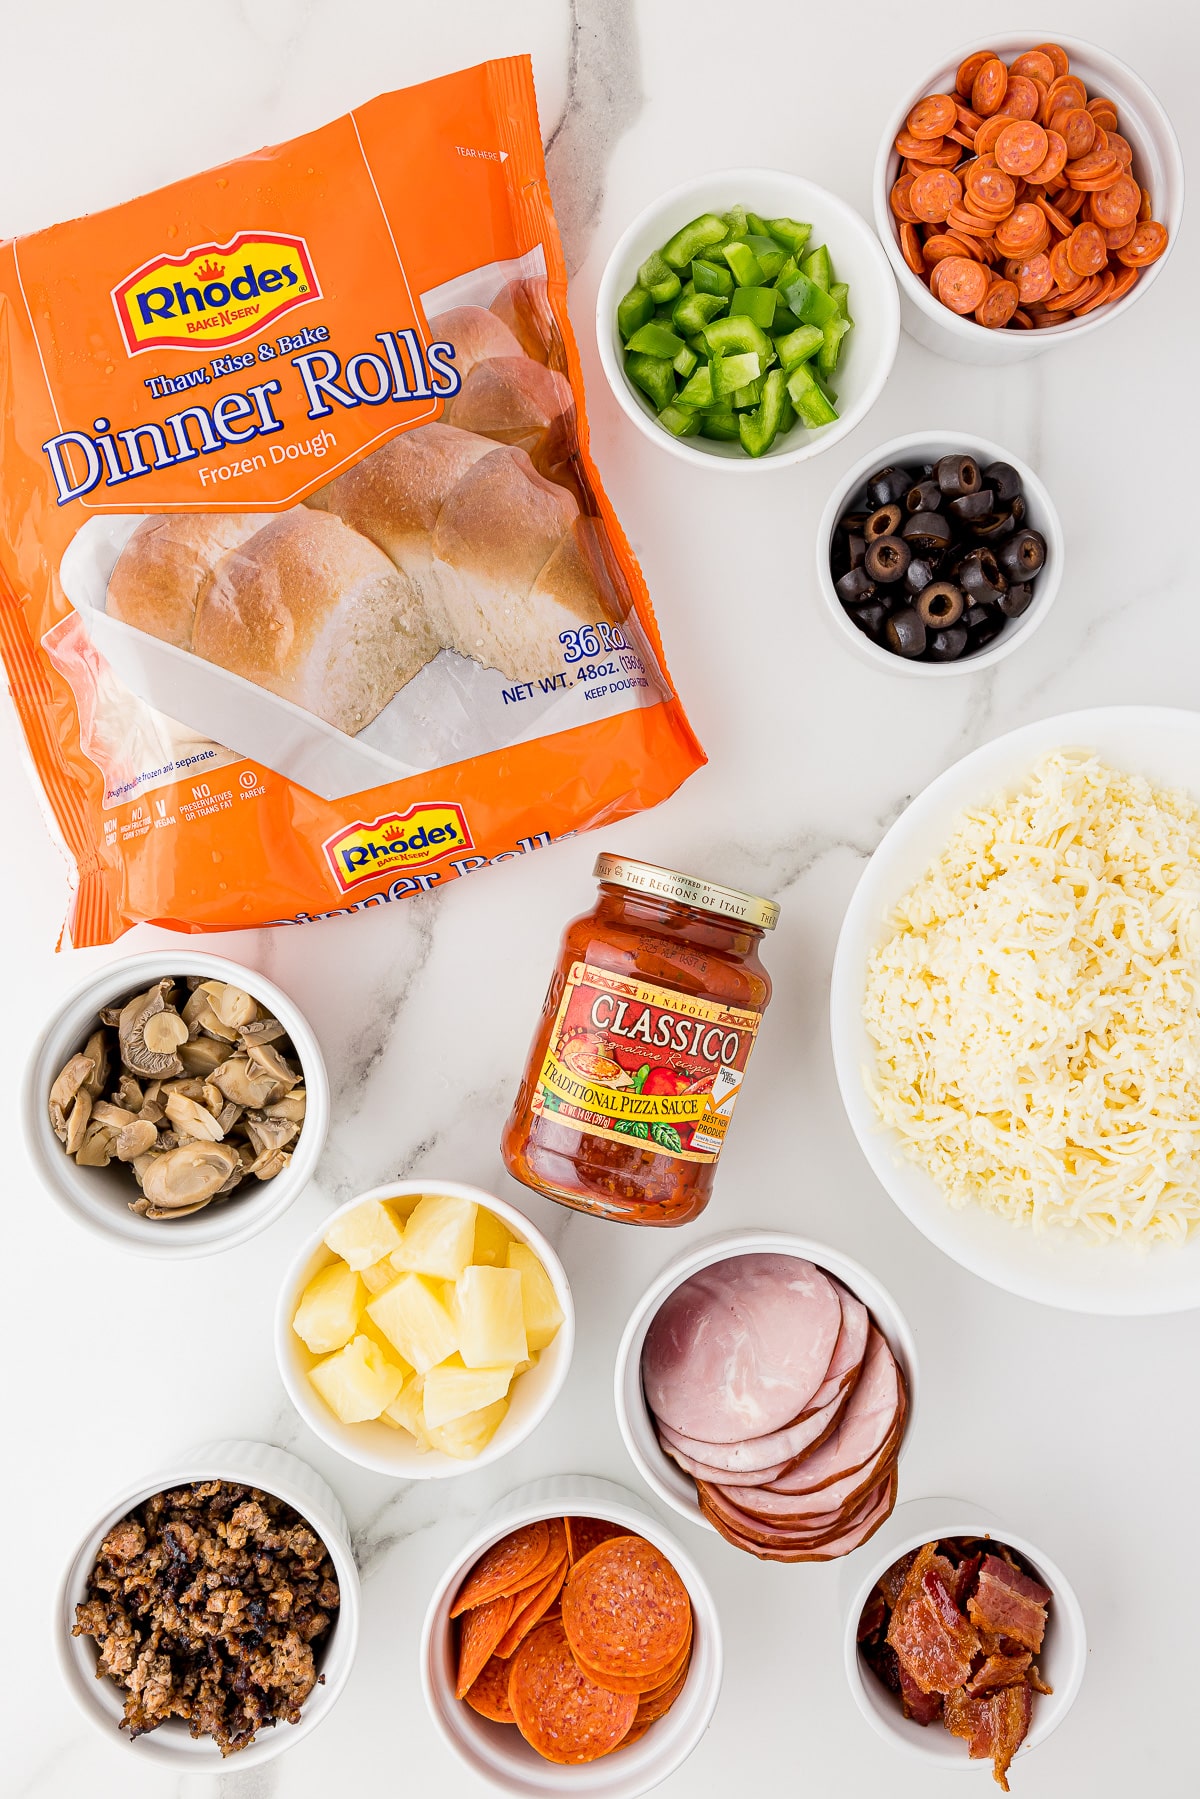 ingredients for mini pizzas on a white marble countertop, including meats, olives, cheese, a package of Rhodes frozen dinner rolls and Classico traditional pizza sauce